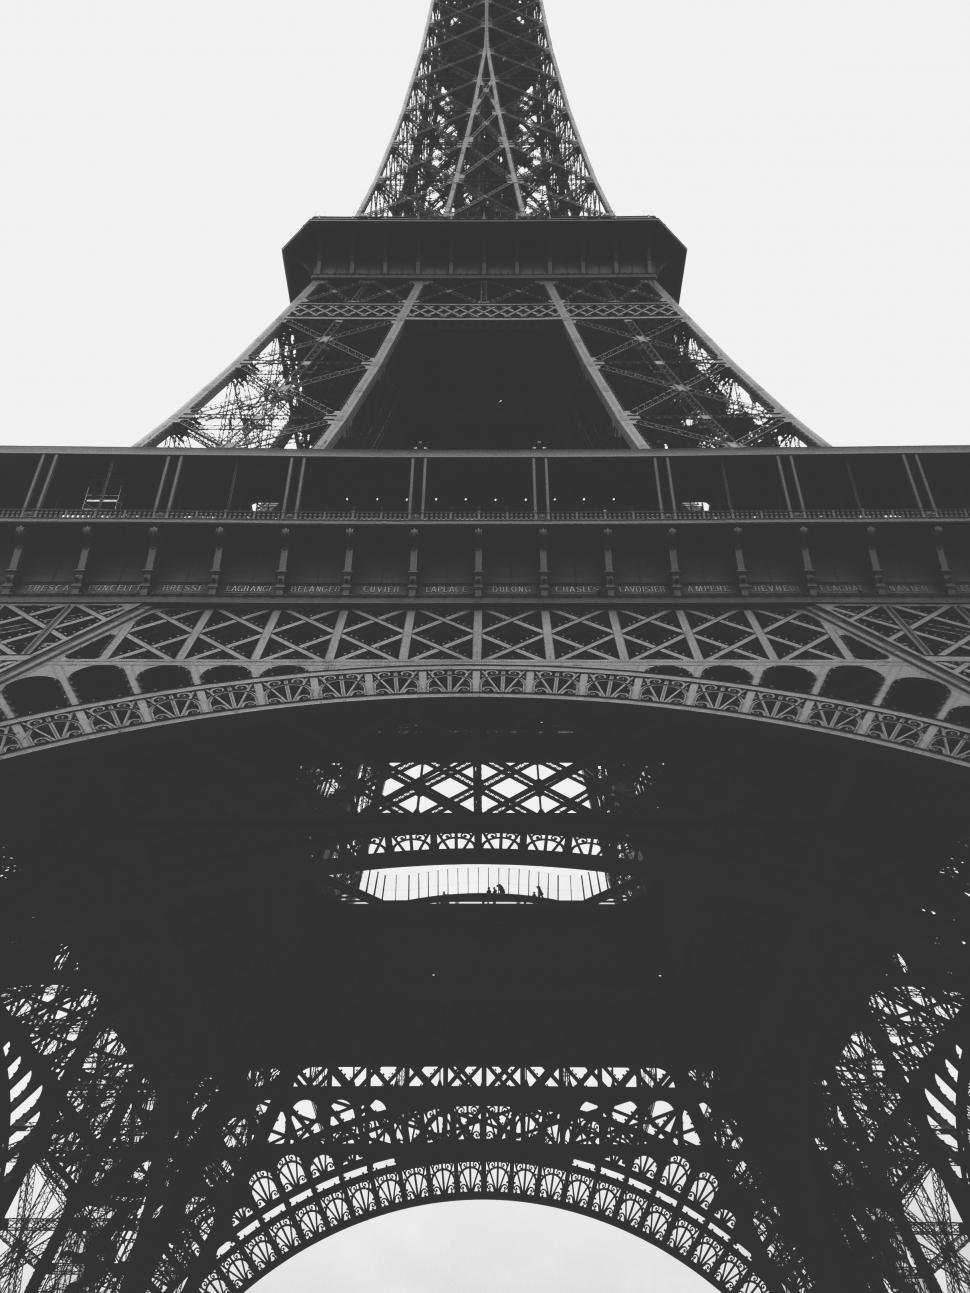 Free Image of Iconic Eiffel Tower in Black and White 